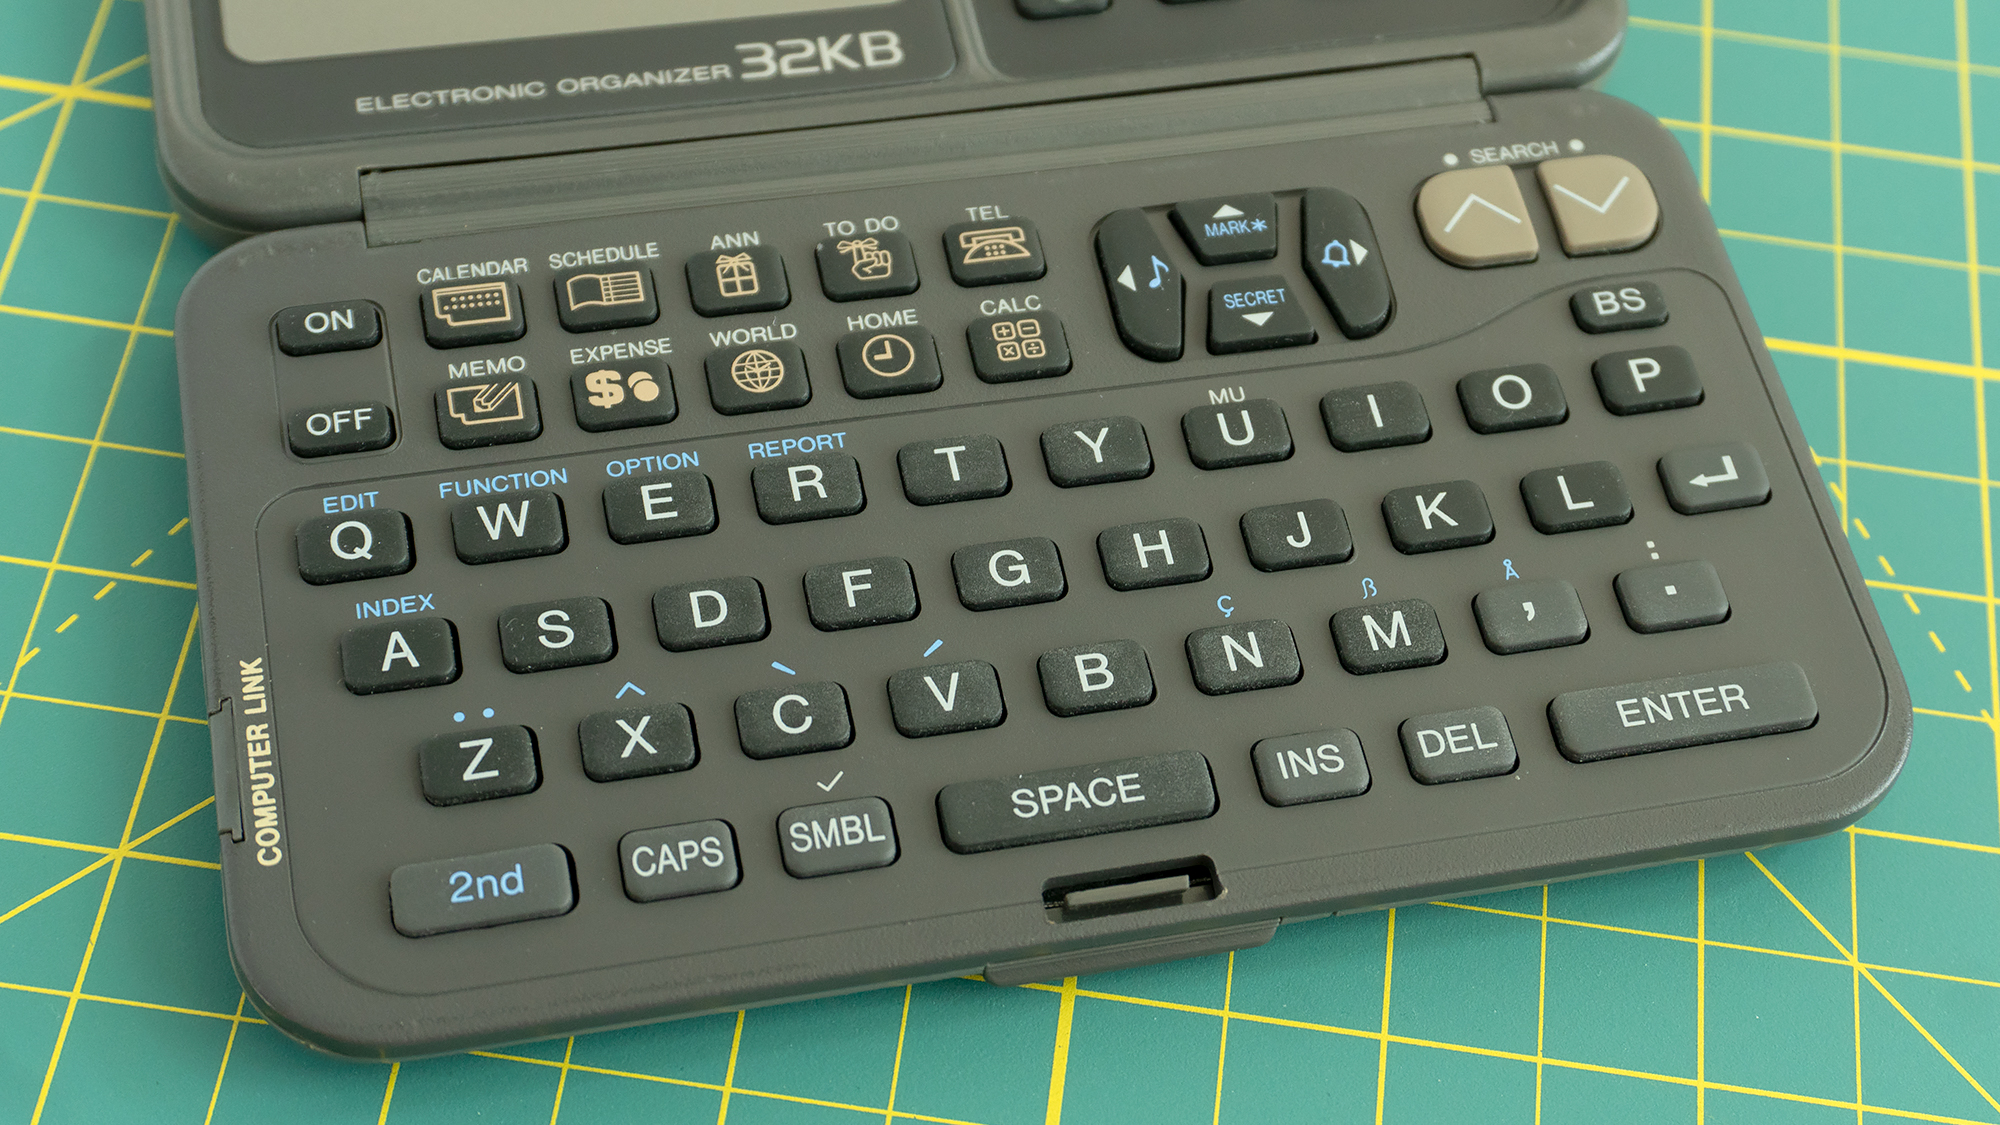 A full QWERTY keyboard layout made it easier to find the letter you were looking for if you knew how to type, but trying to actually touch type on a layout this small is an act of futility. (Photo: Andrew Liszewski - Gizmodo)